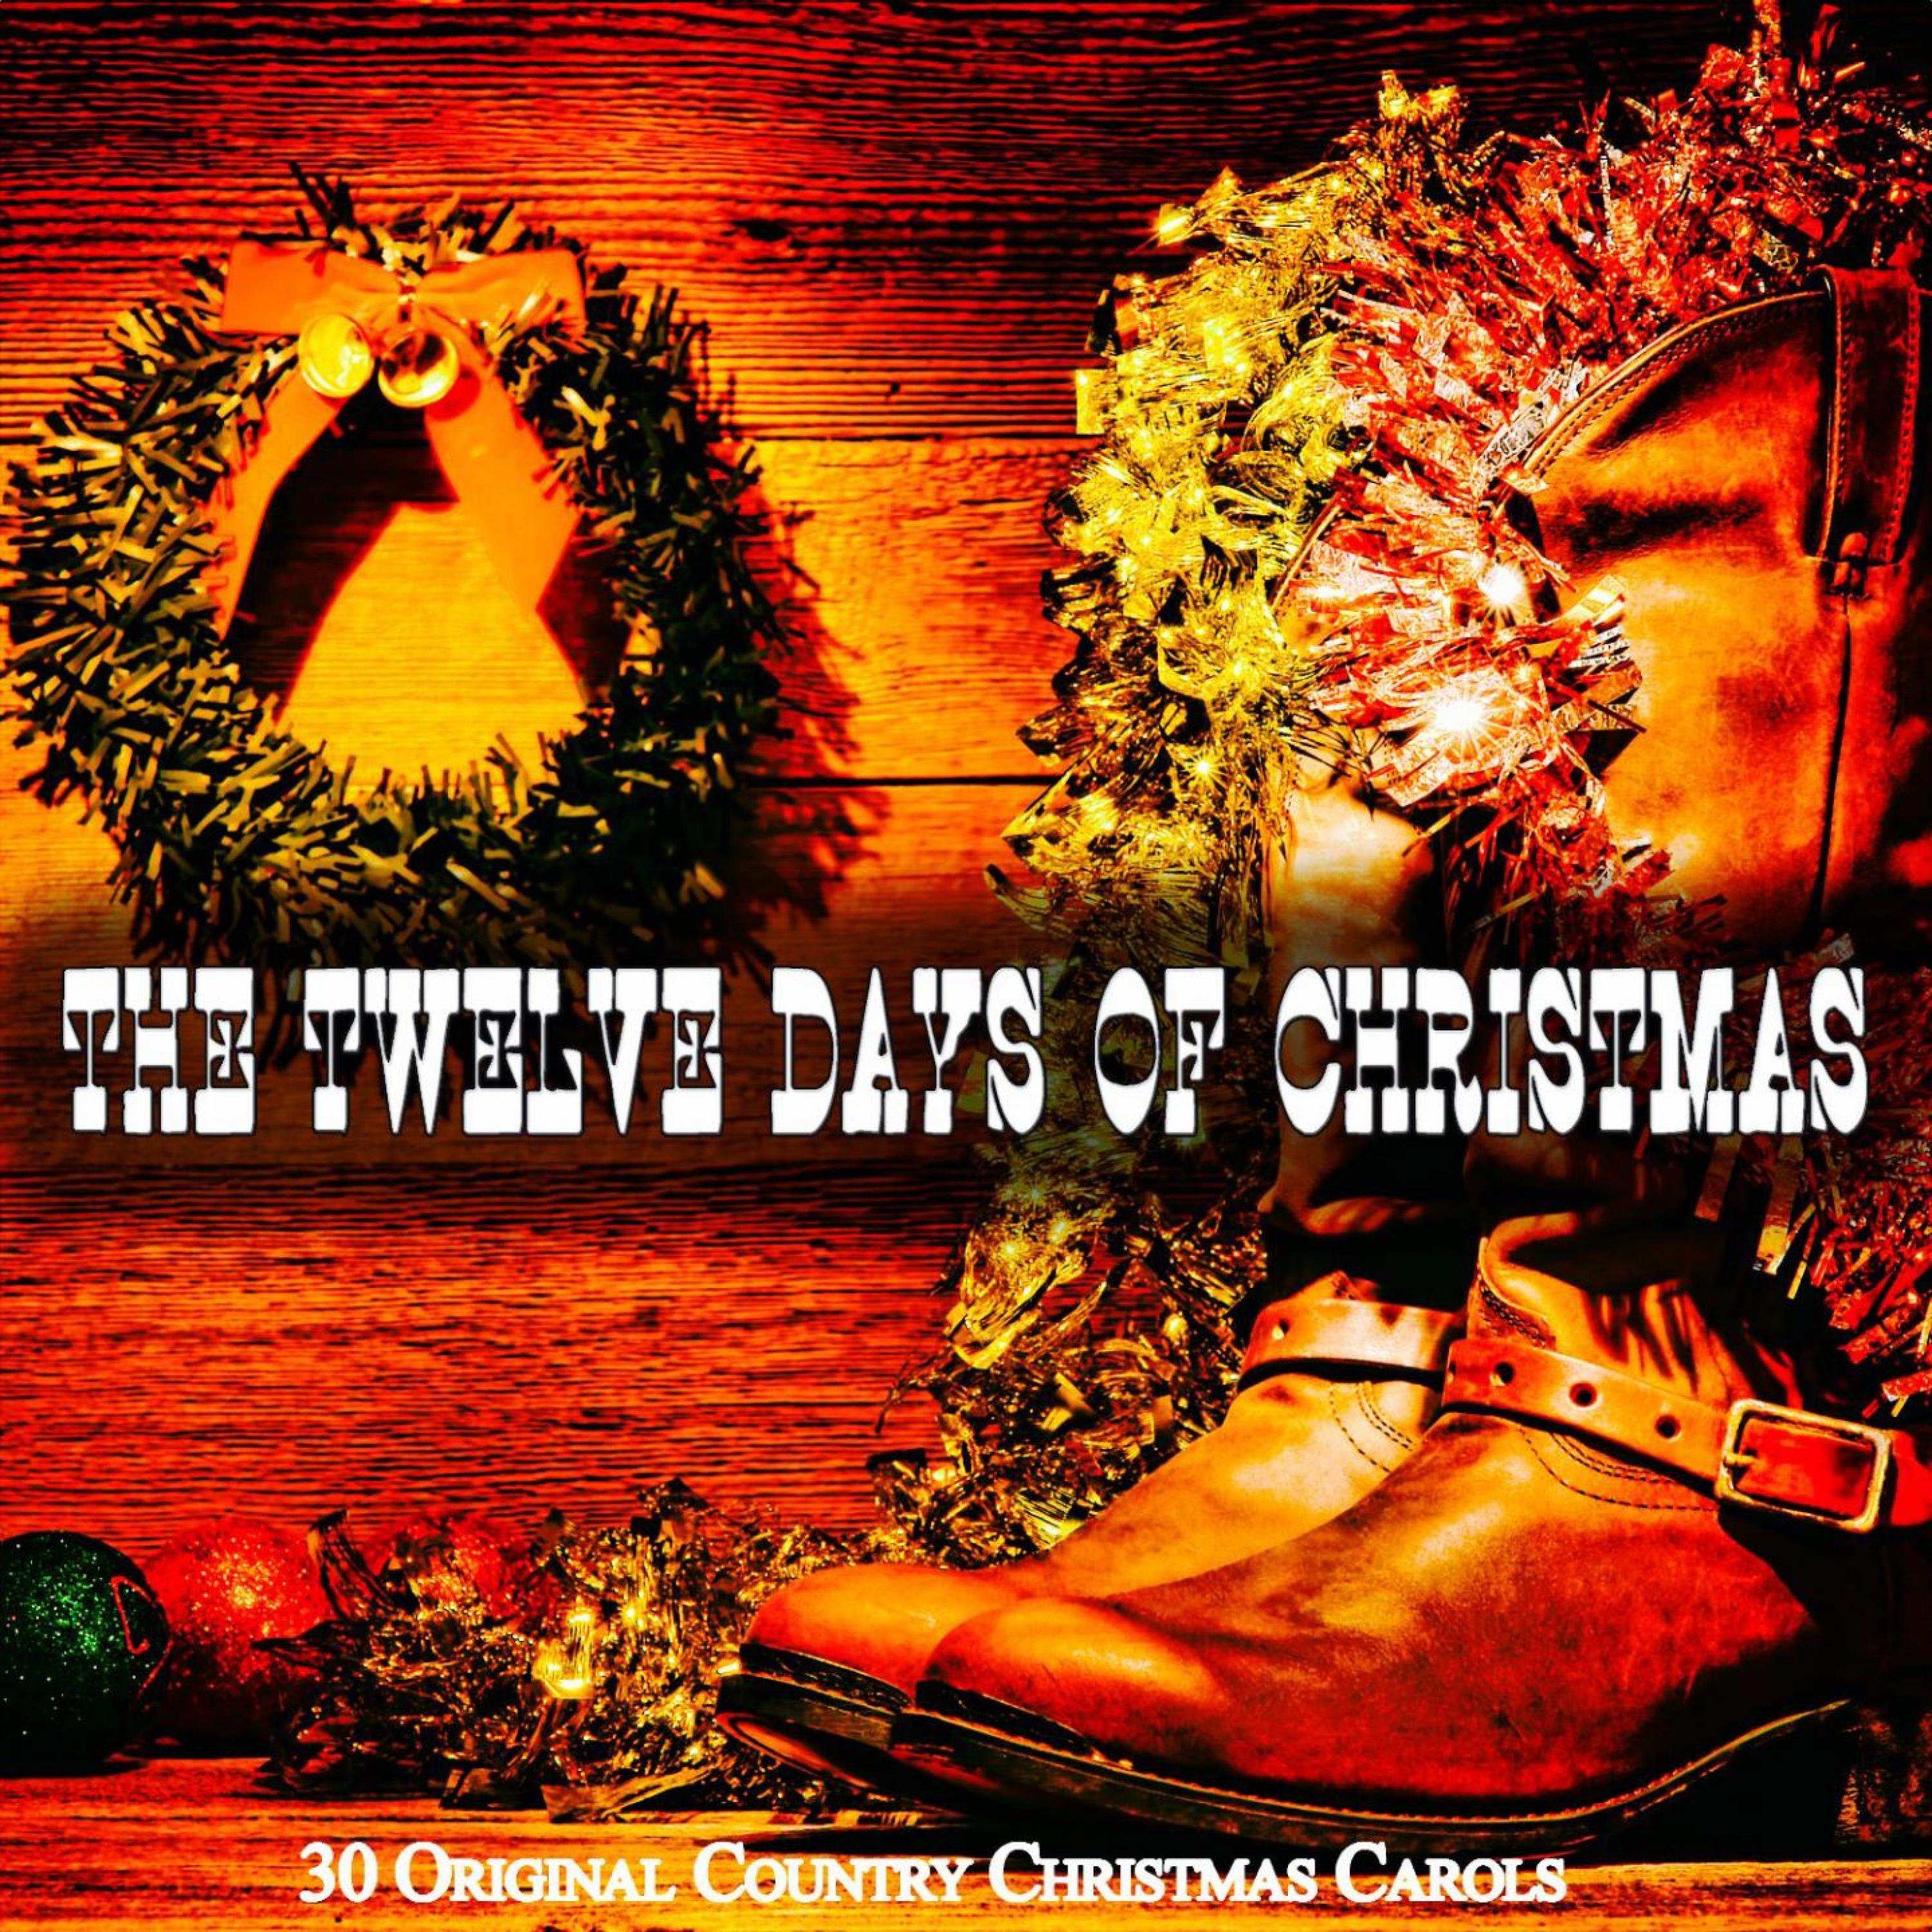 The Weavers - The Twelve Days of Christmas